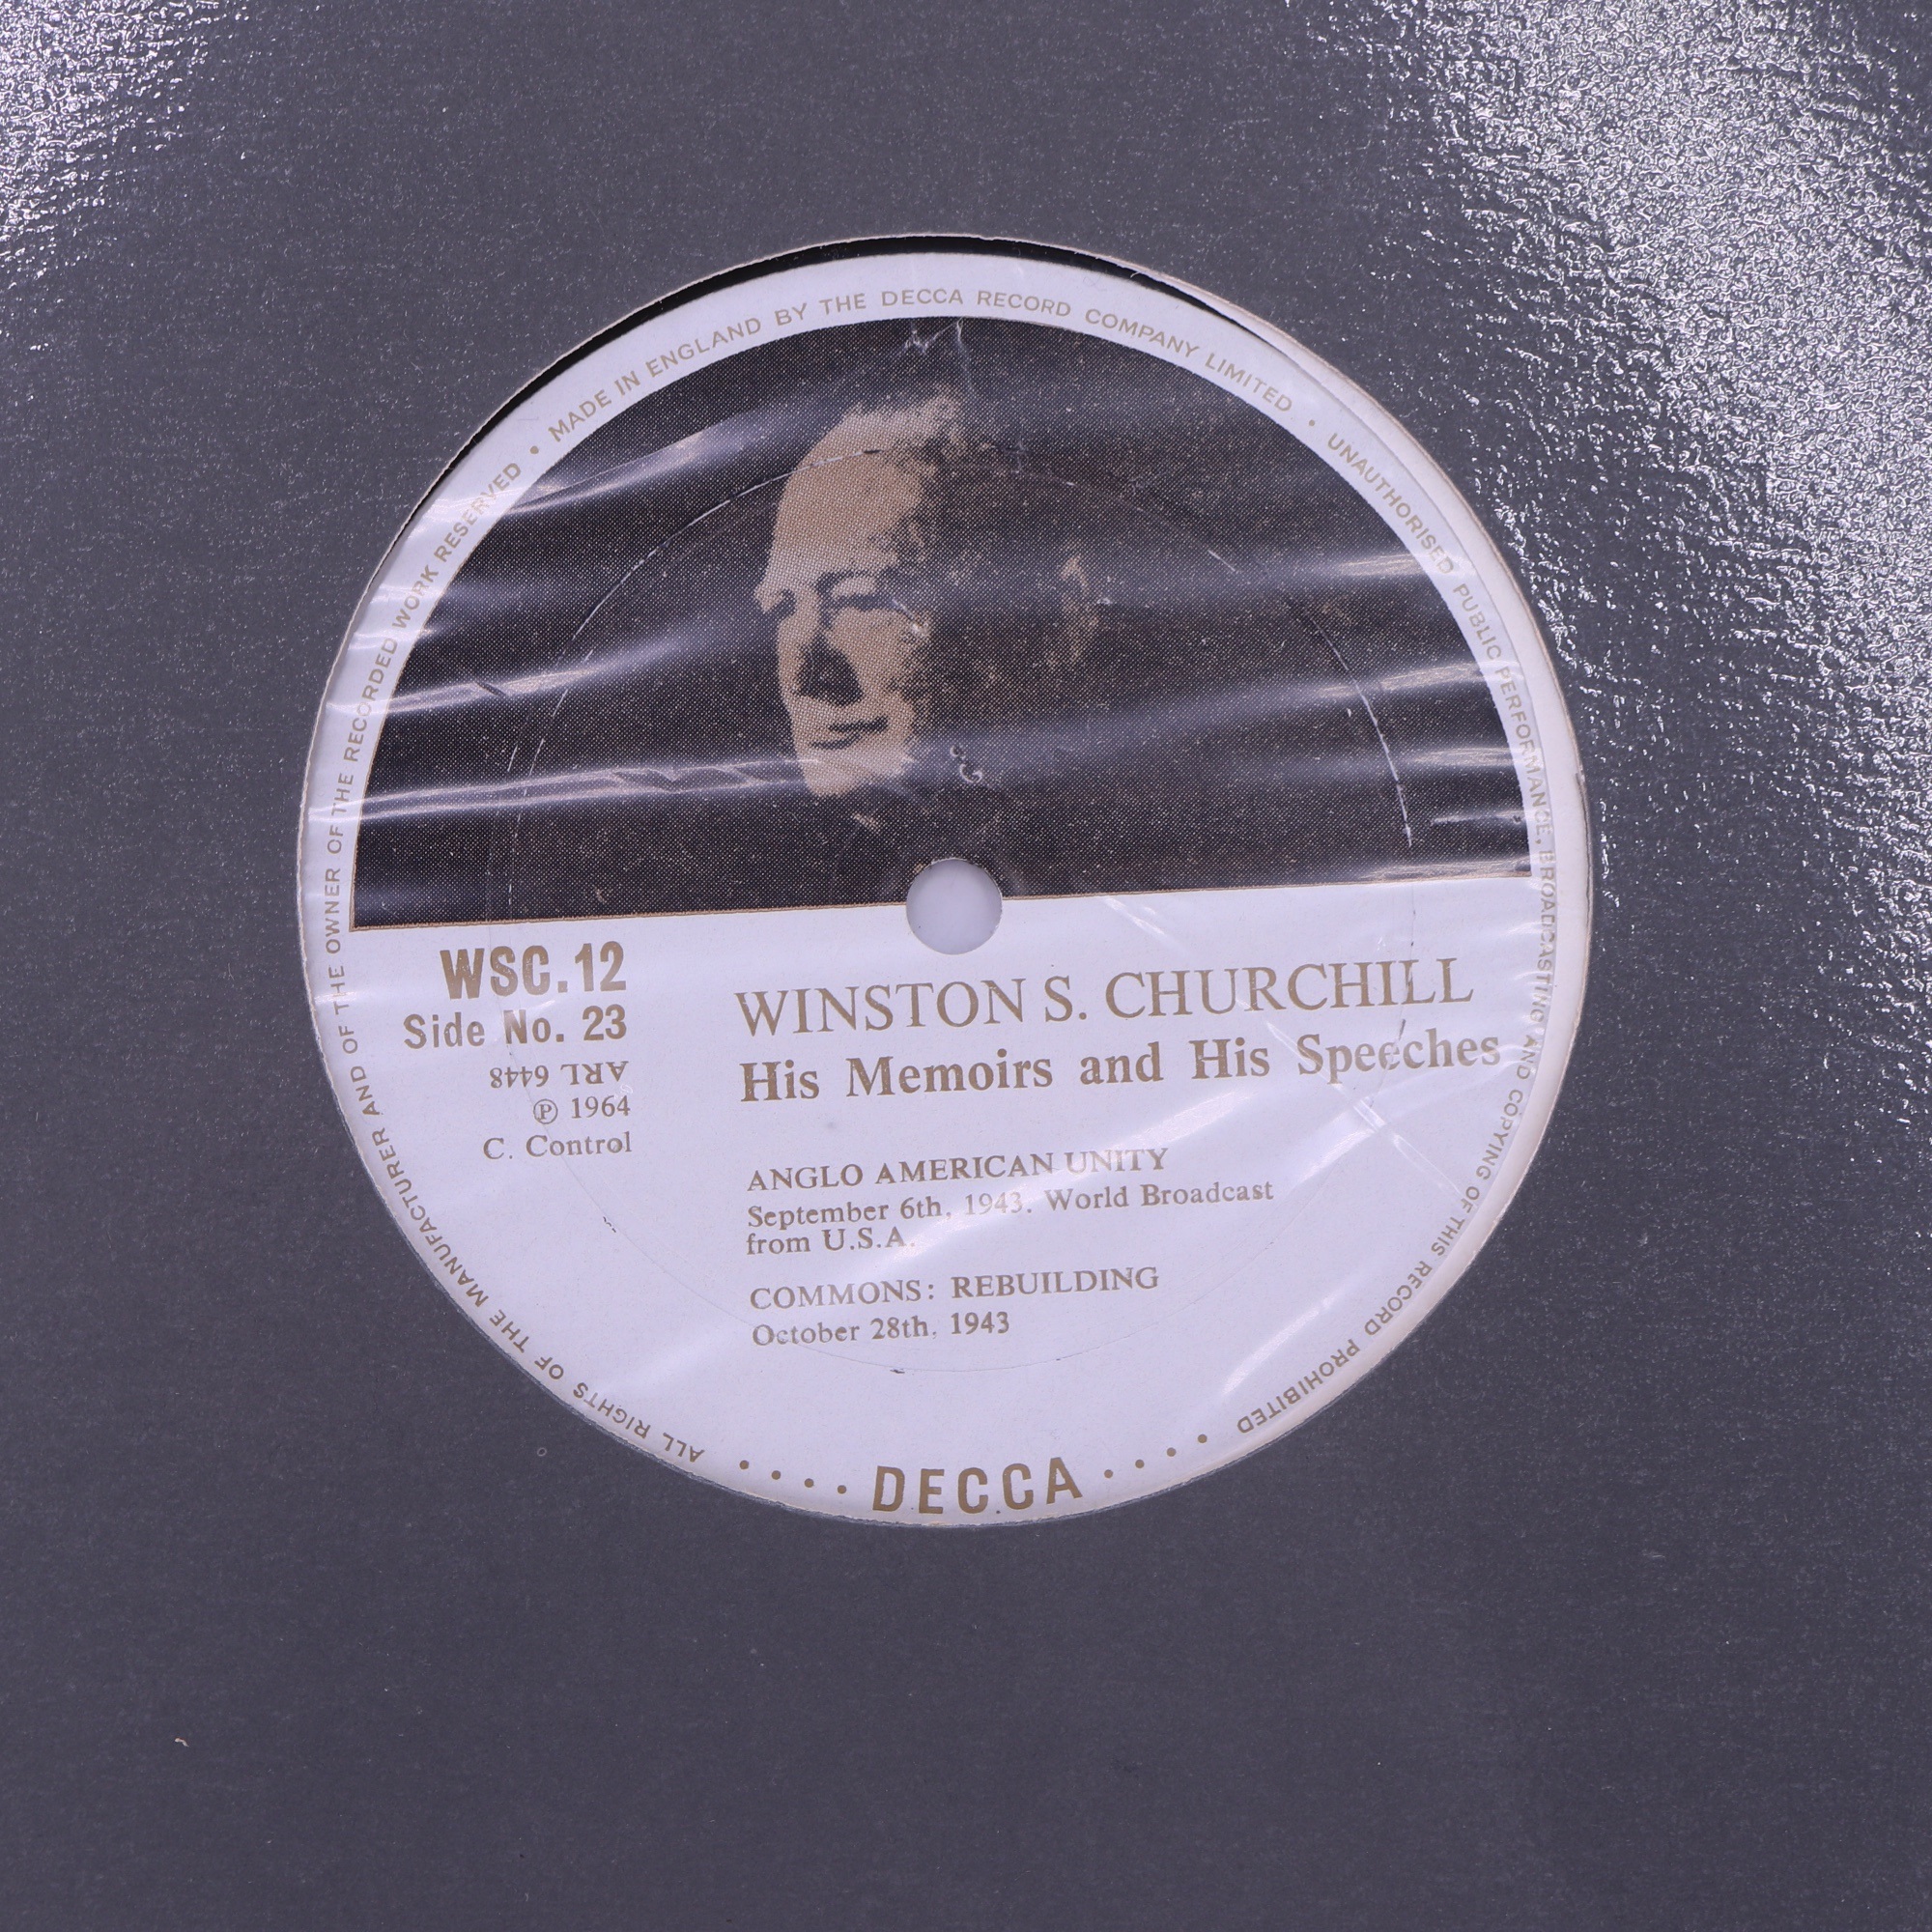 A 12-disc set of "Winston S Churchill, His Memoirs and His Speeches" 33 rpm vinyl records, Decca, - Image 13 of 13